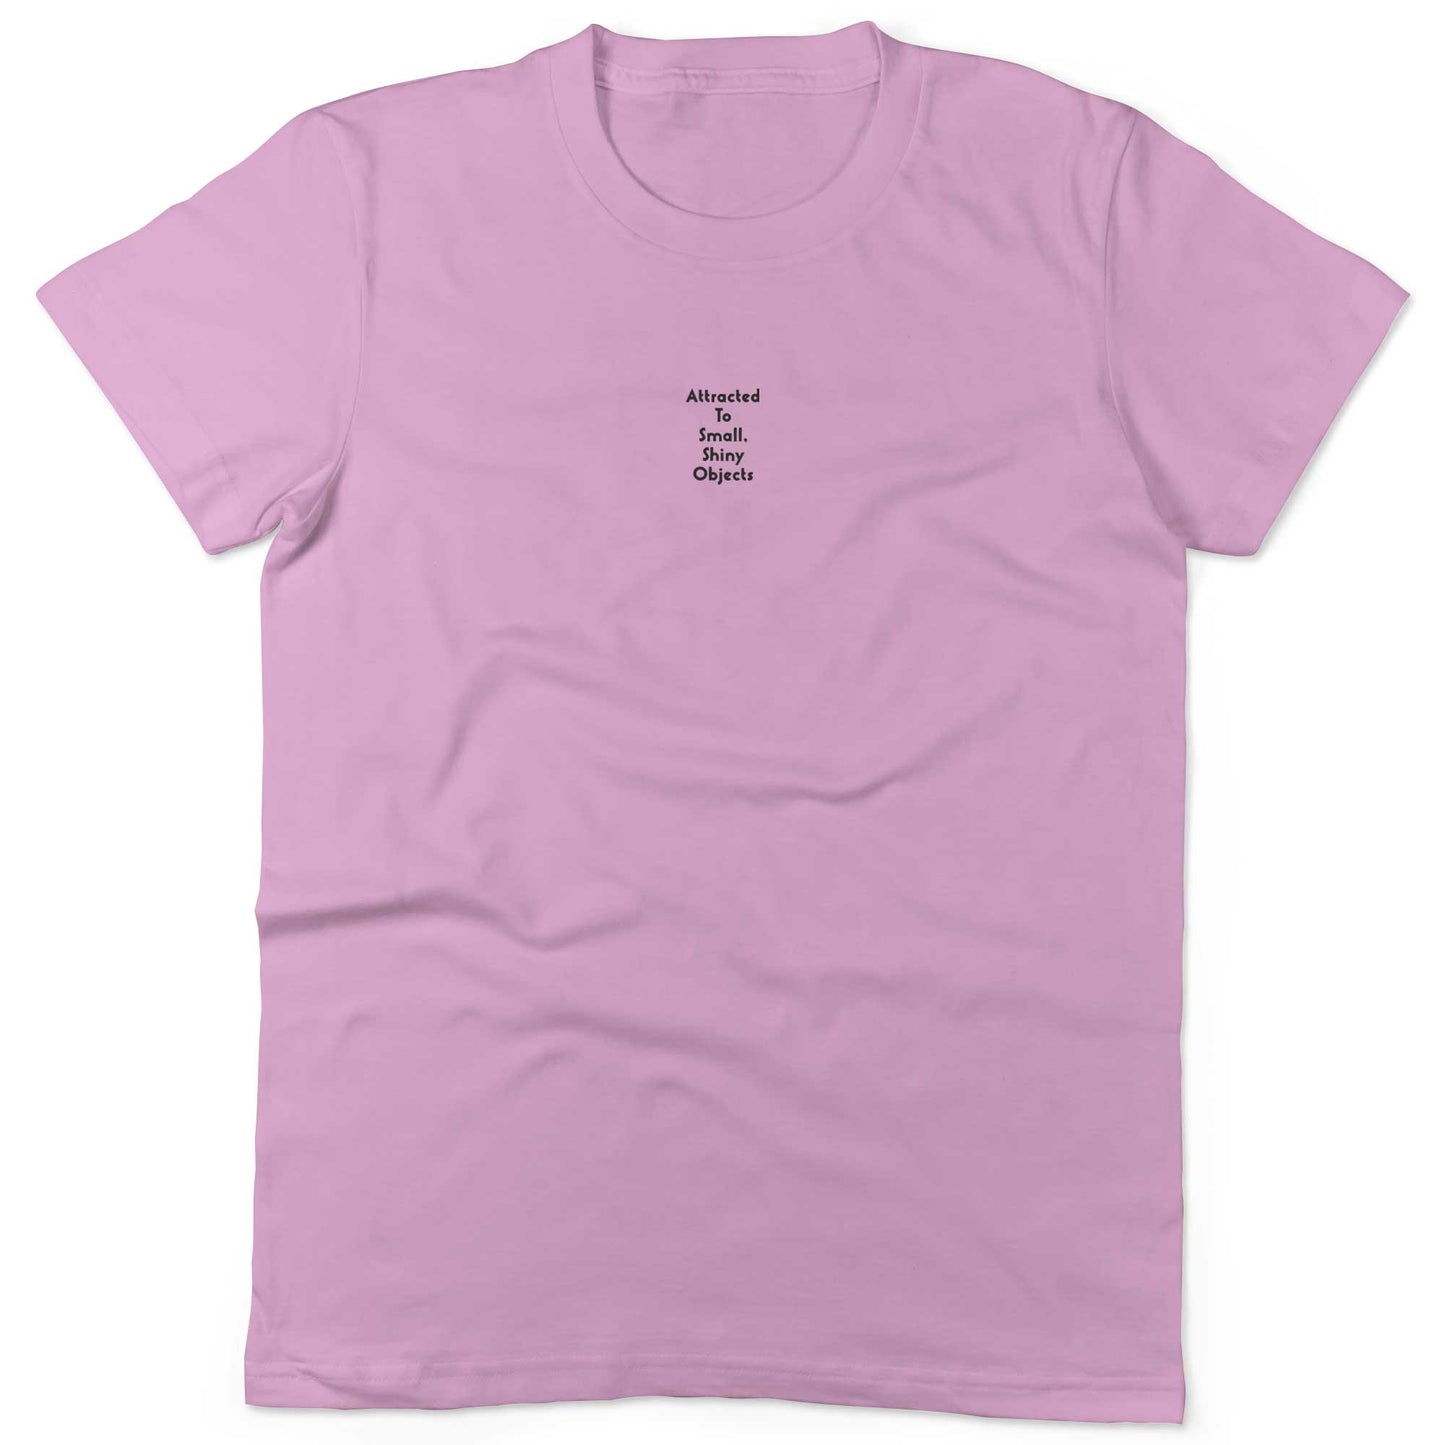 Attracted To Small, Shiny Objects Unisex Or Women's Cotton T-shirt-Pink-Woman